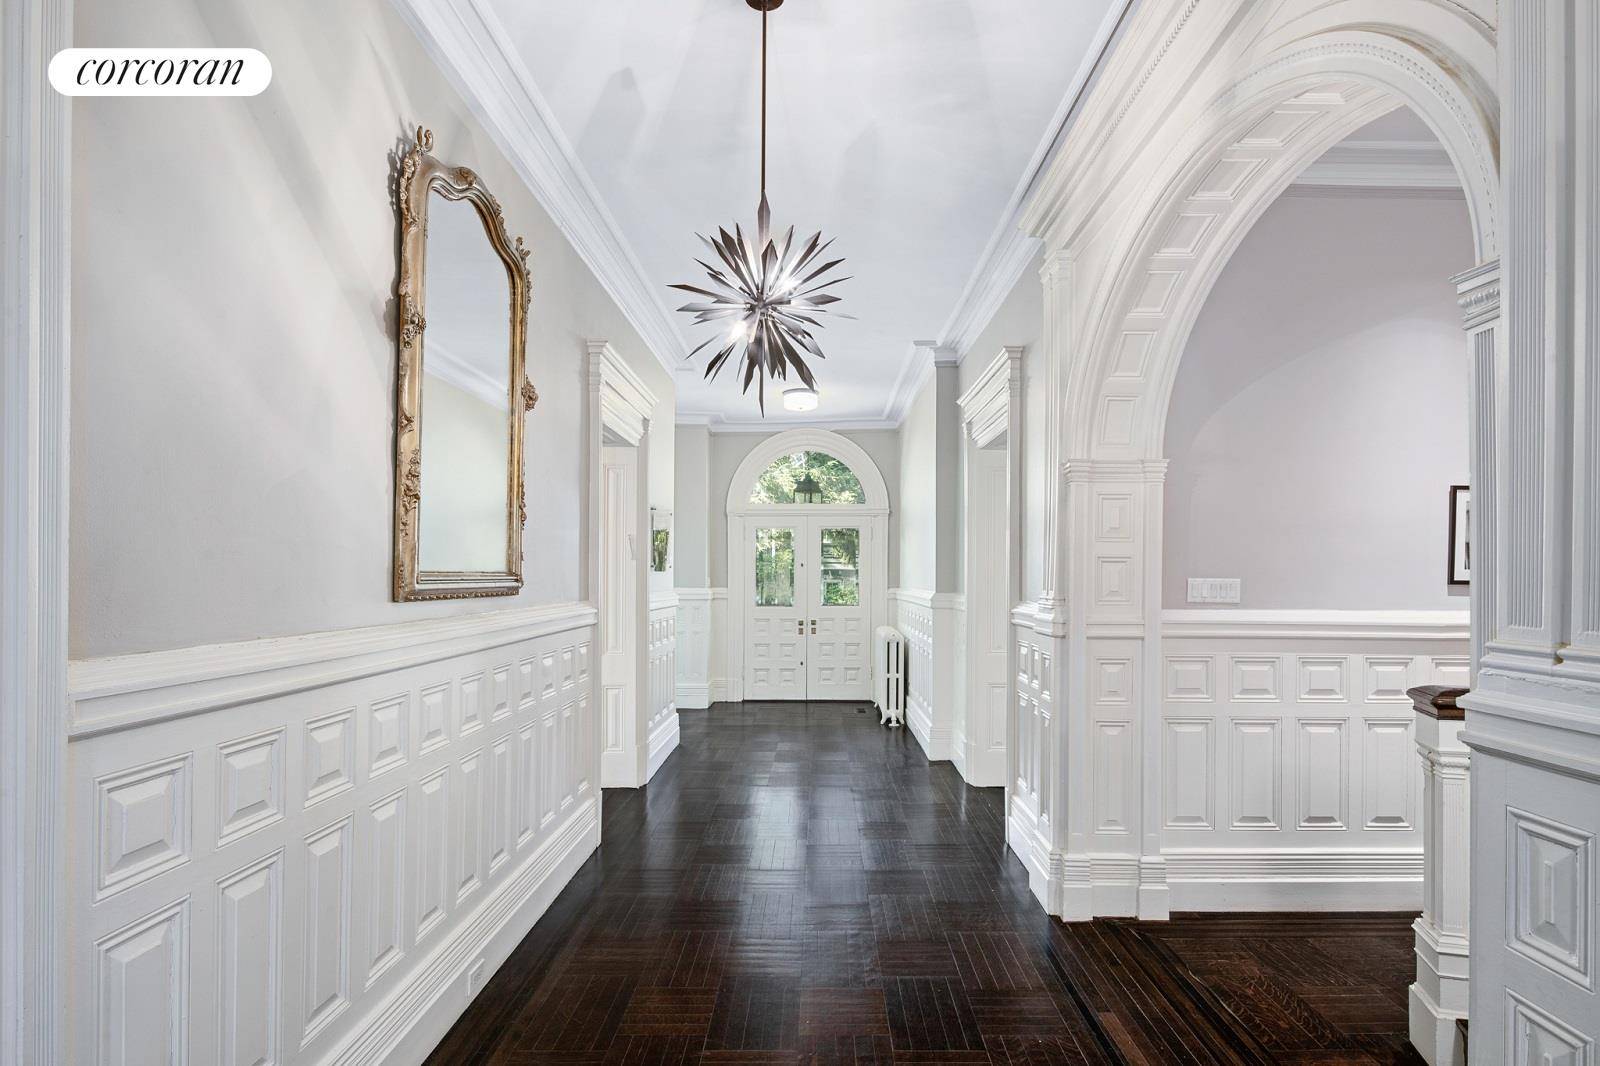 Welcome to Alderbook Mansion, a Gothic Revival English Brick House situated in the Estate section of Riverdale, nestled at the end of a cul de sac for the utmost privacy.